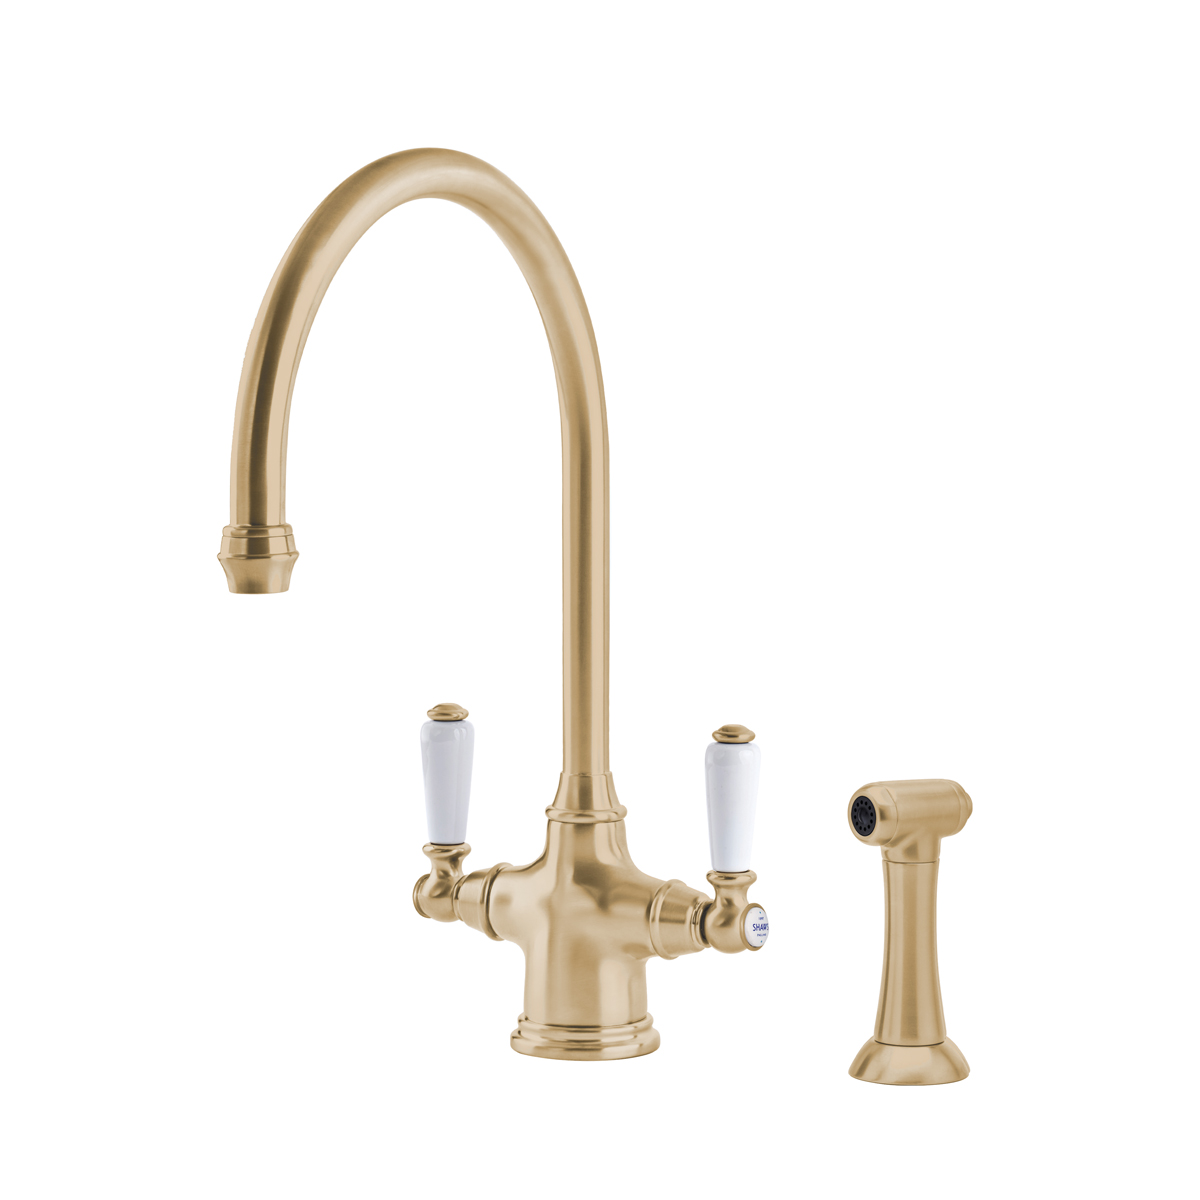 Shaws by Perrin & Rowe Ribble kitchen mixer with spray rinse in Satin Brass. Phoenician style monobloc kitchen tap AUSH.4360. Distributed in Australia by Luxe by Design, Brisbane.